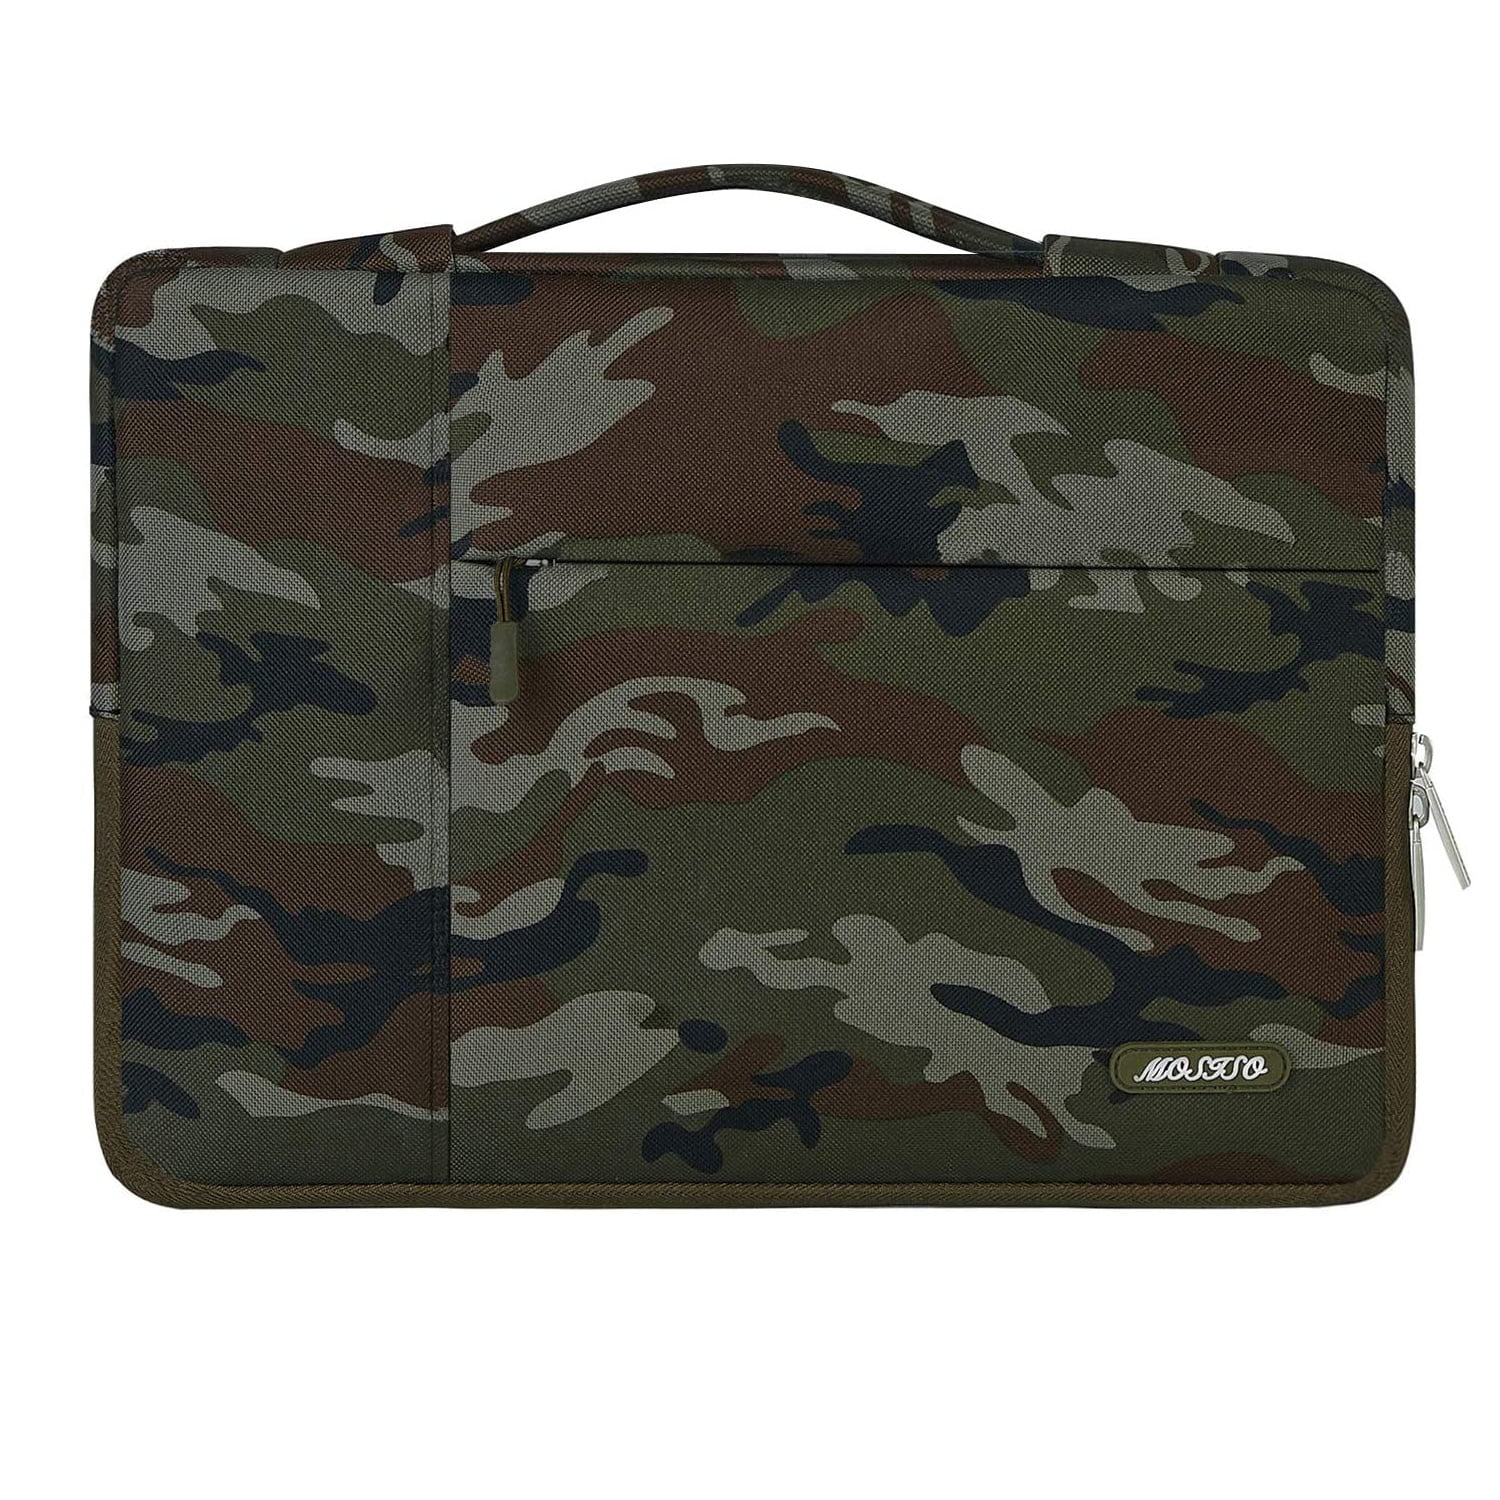 Mosiso for Macbook Air/Pro 13.3" Laptop Sleeve Briefcase Handbag Water Resistant Polyester Carrying Pouch Zipper Notebook Computer Bag, Army Green Camouflage